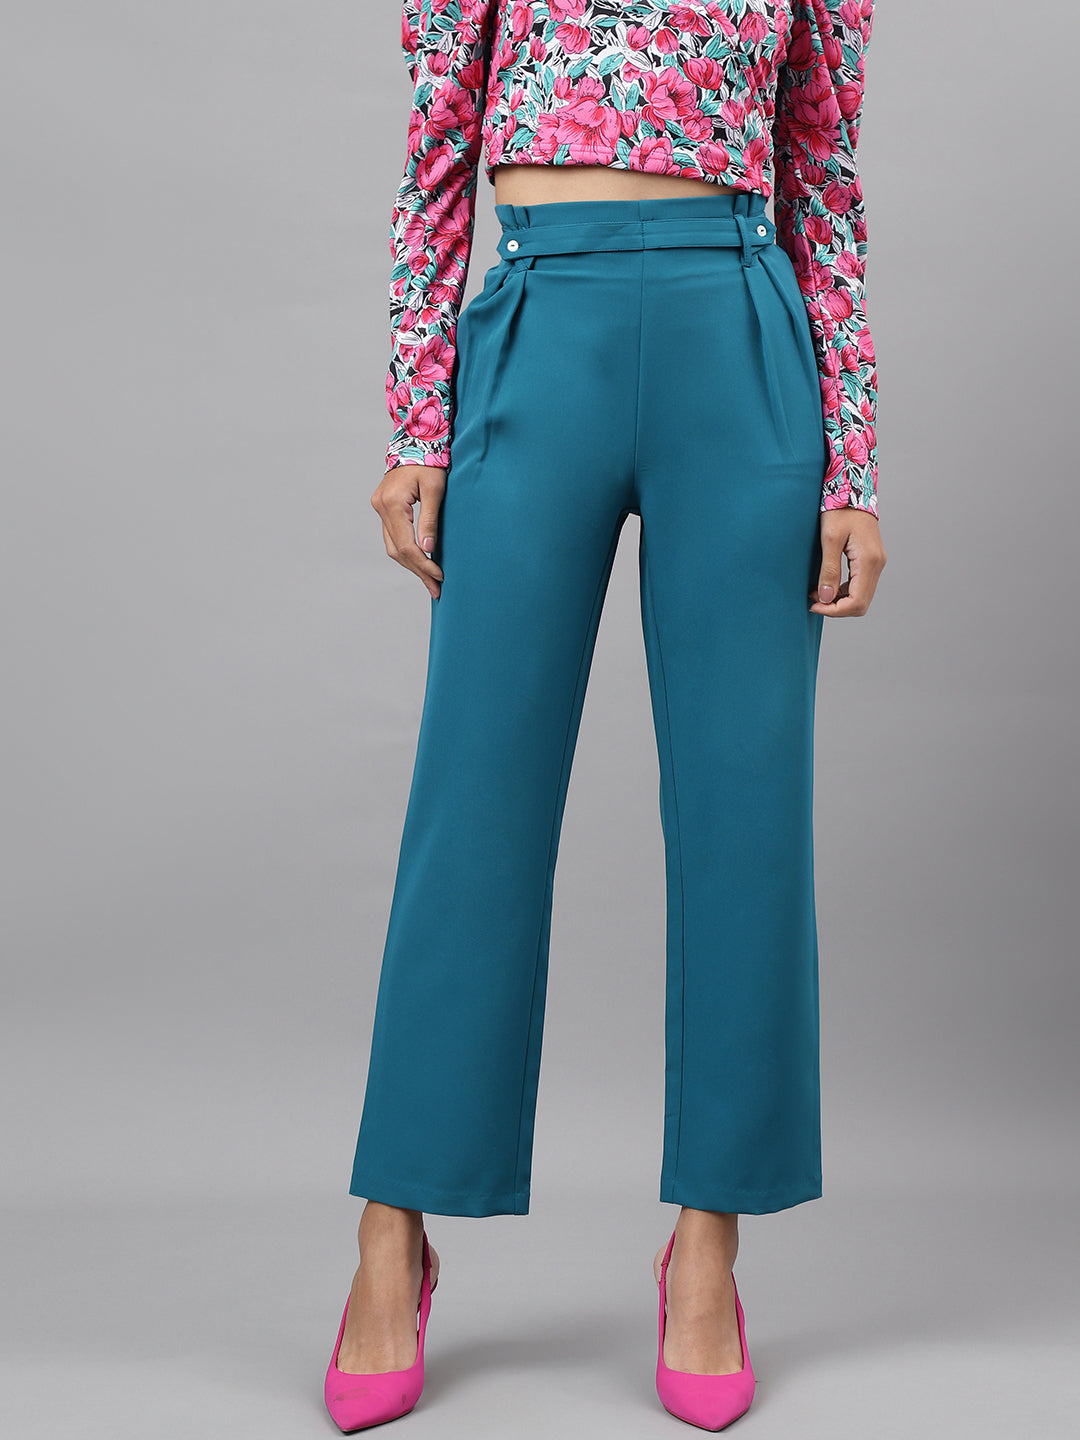 Turquoise Solid Women Straight Pant for Casual